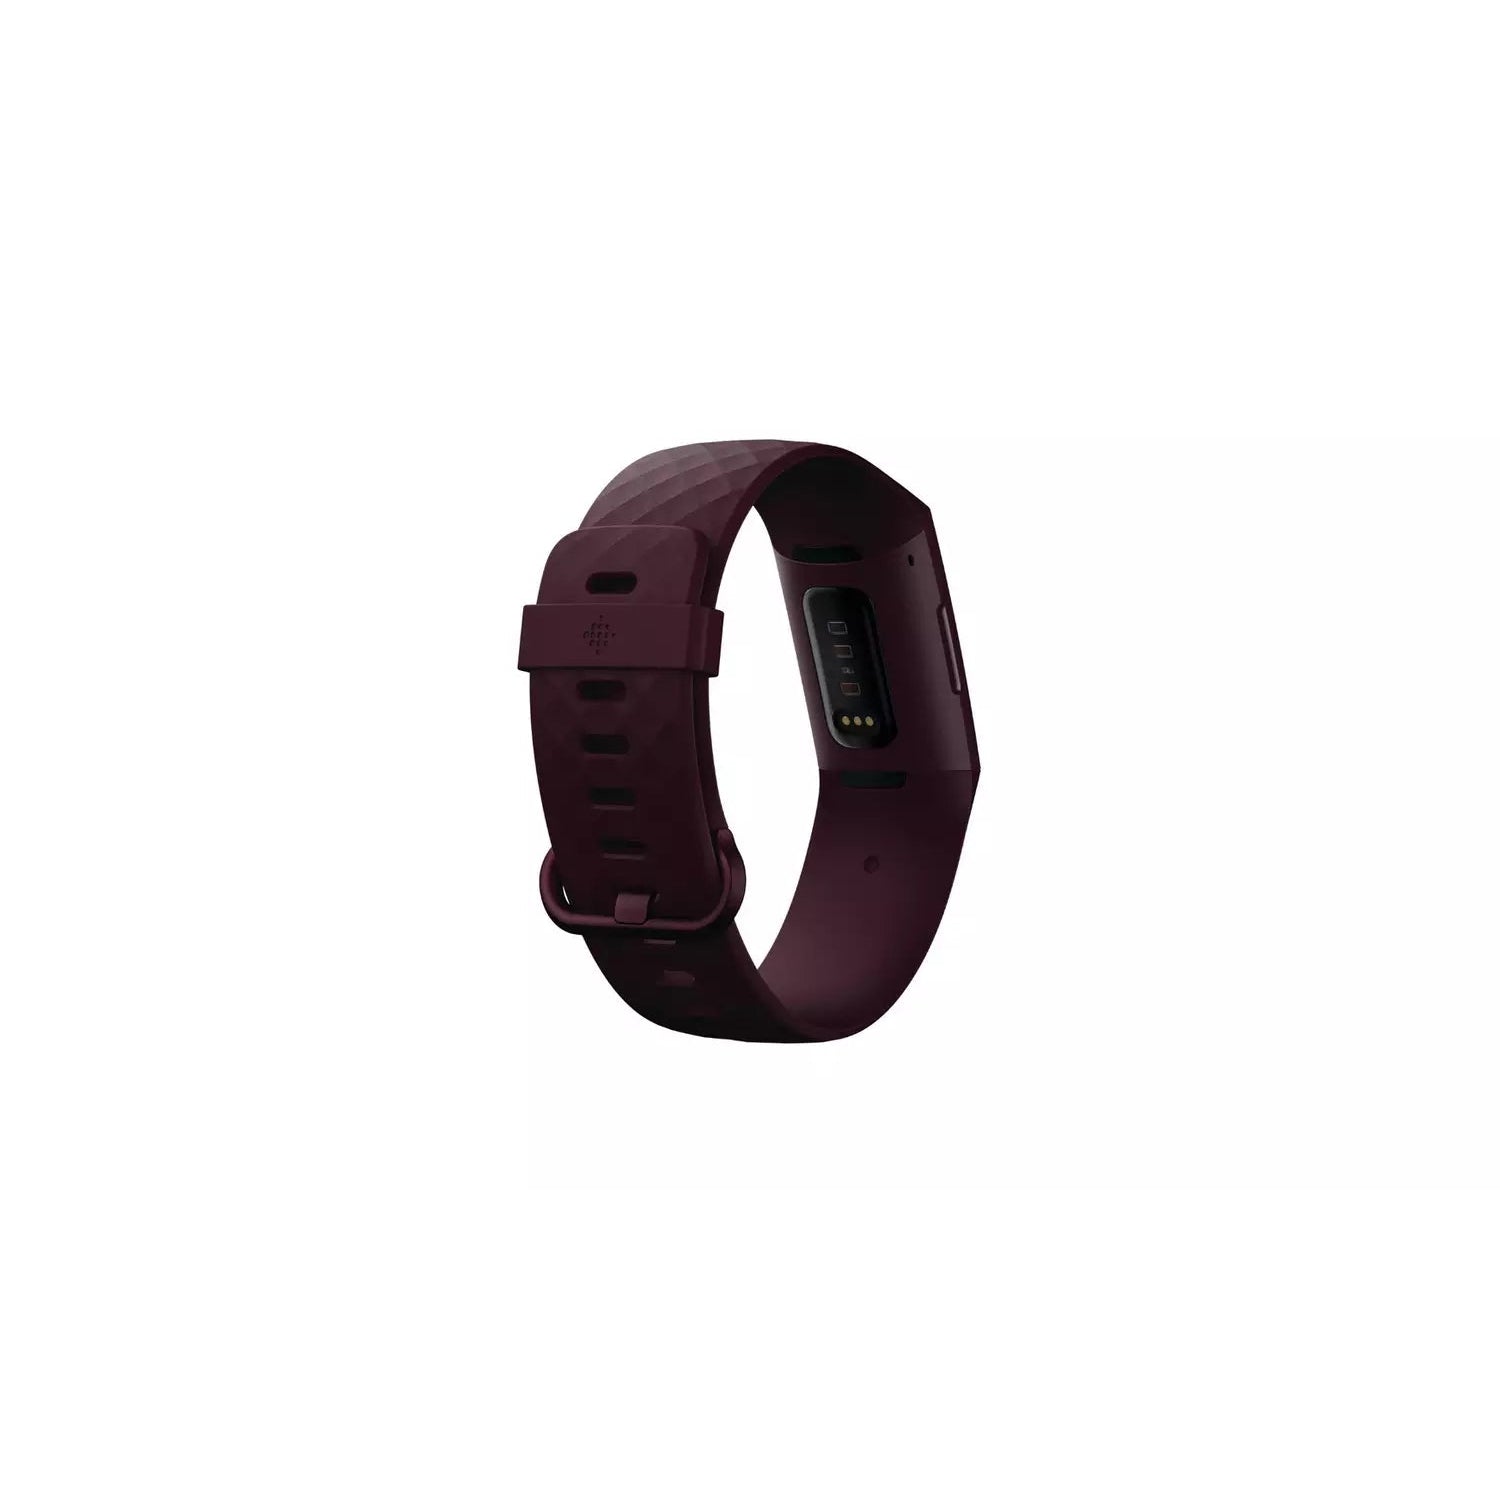 Fitbit Charge 4 Advanced Fitness Tracker with GPS - Rosewood - Refurbished Good